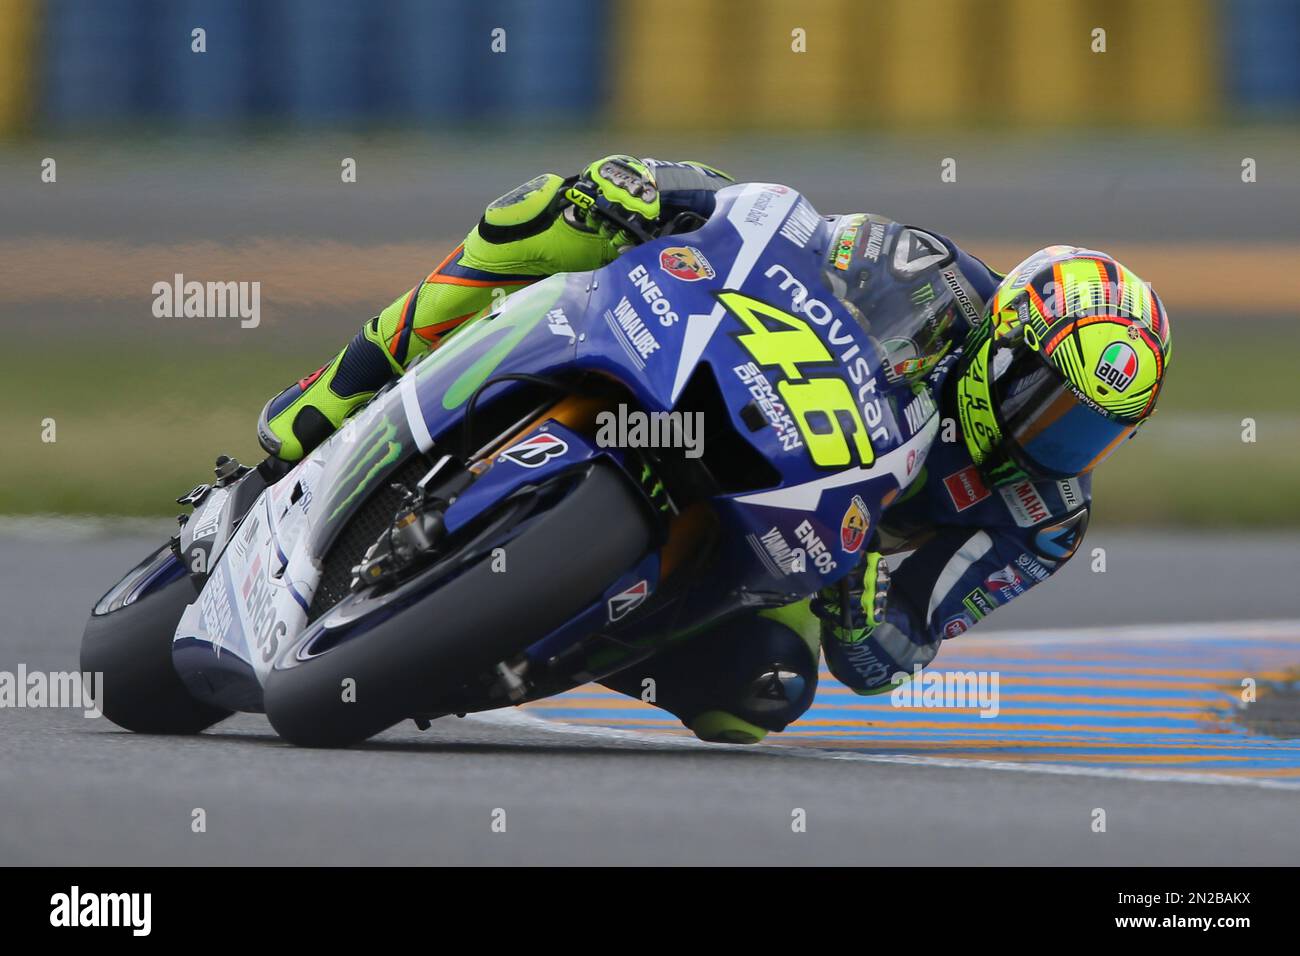 Italian Moto GP rider Valentino Rossi steers his Yamaha during the free practice session of the MotoGP World Championship at the Bugatti race track in Le Mans, western France, Friday, May 15,